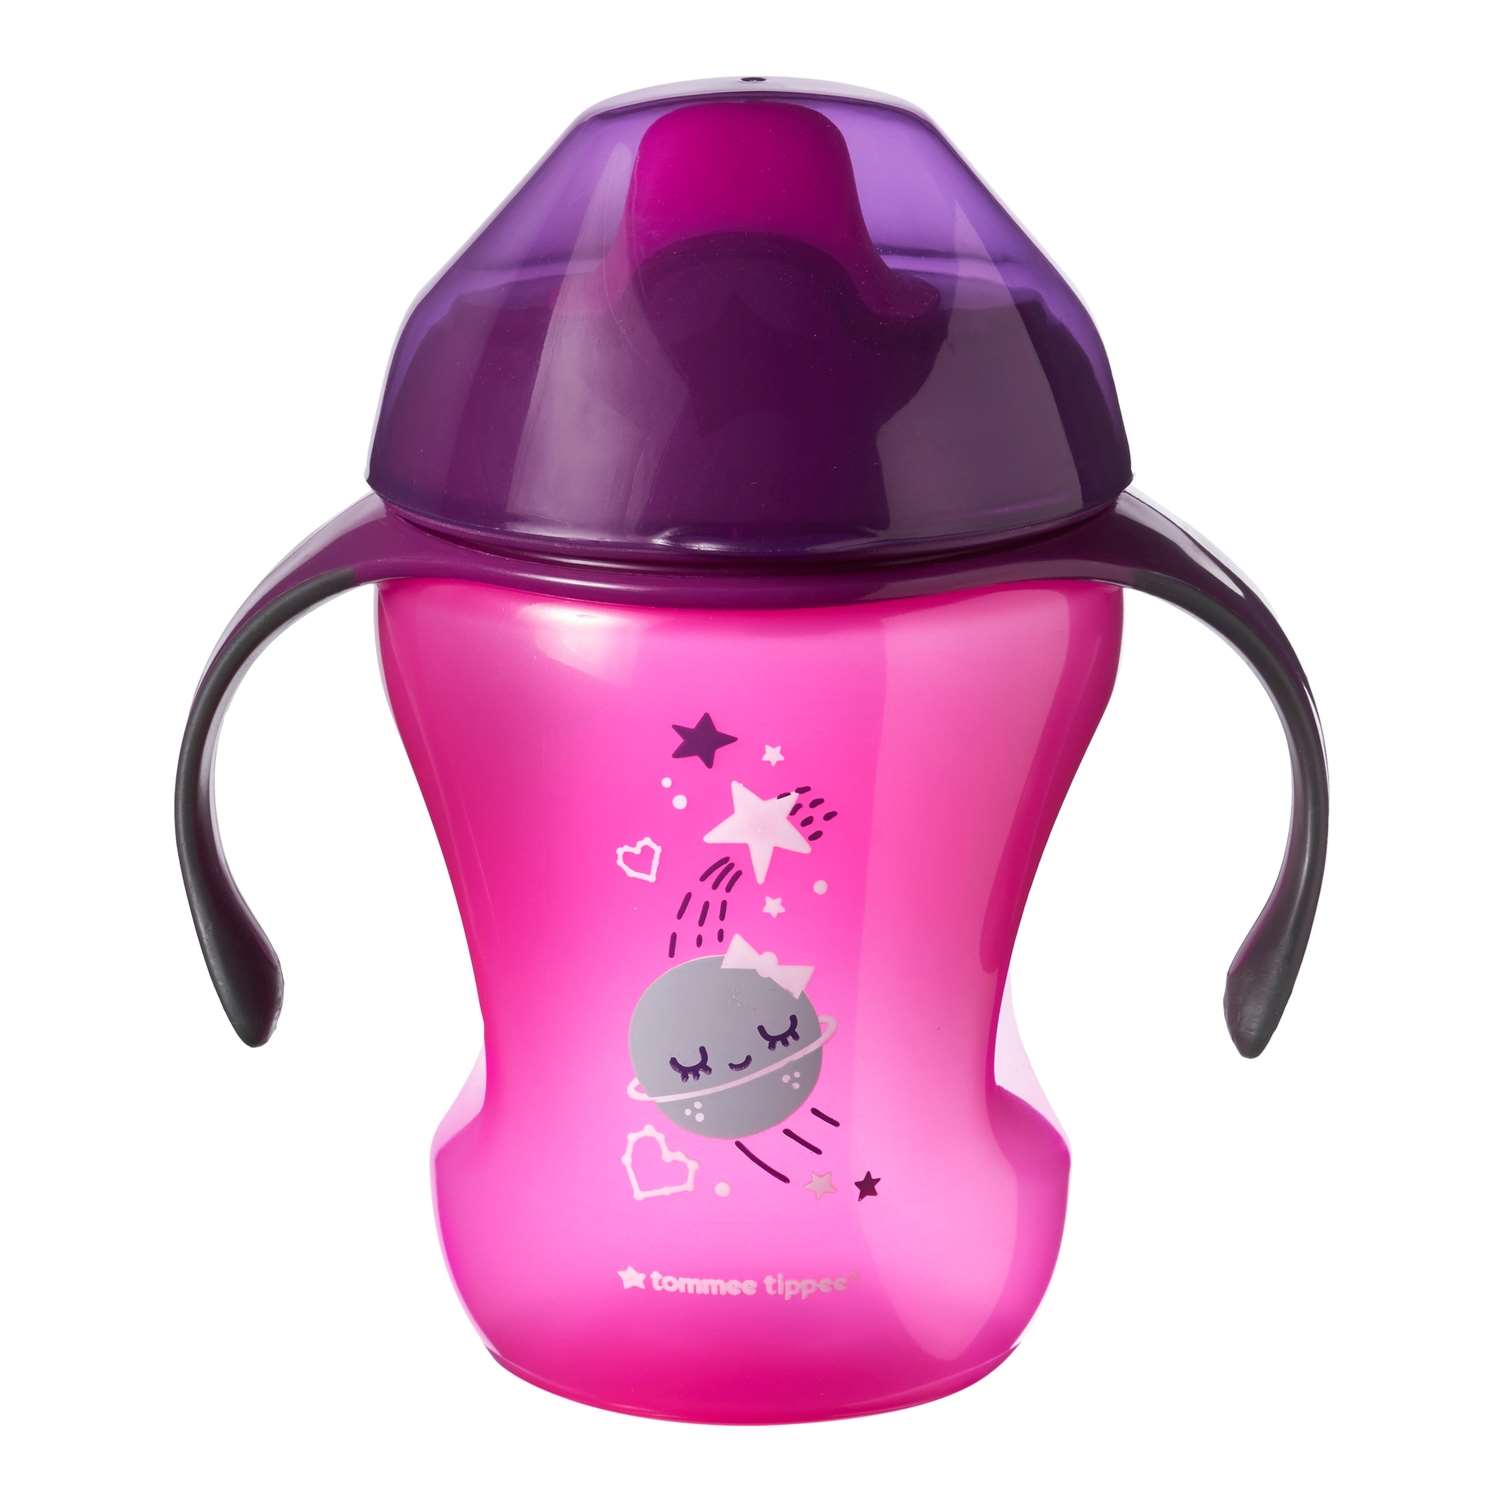 54901050_tt_trainer sippee cup_pink_product